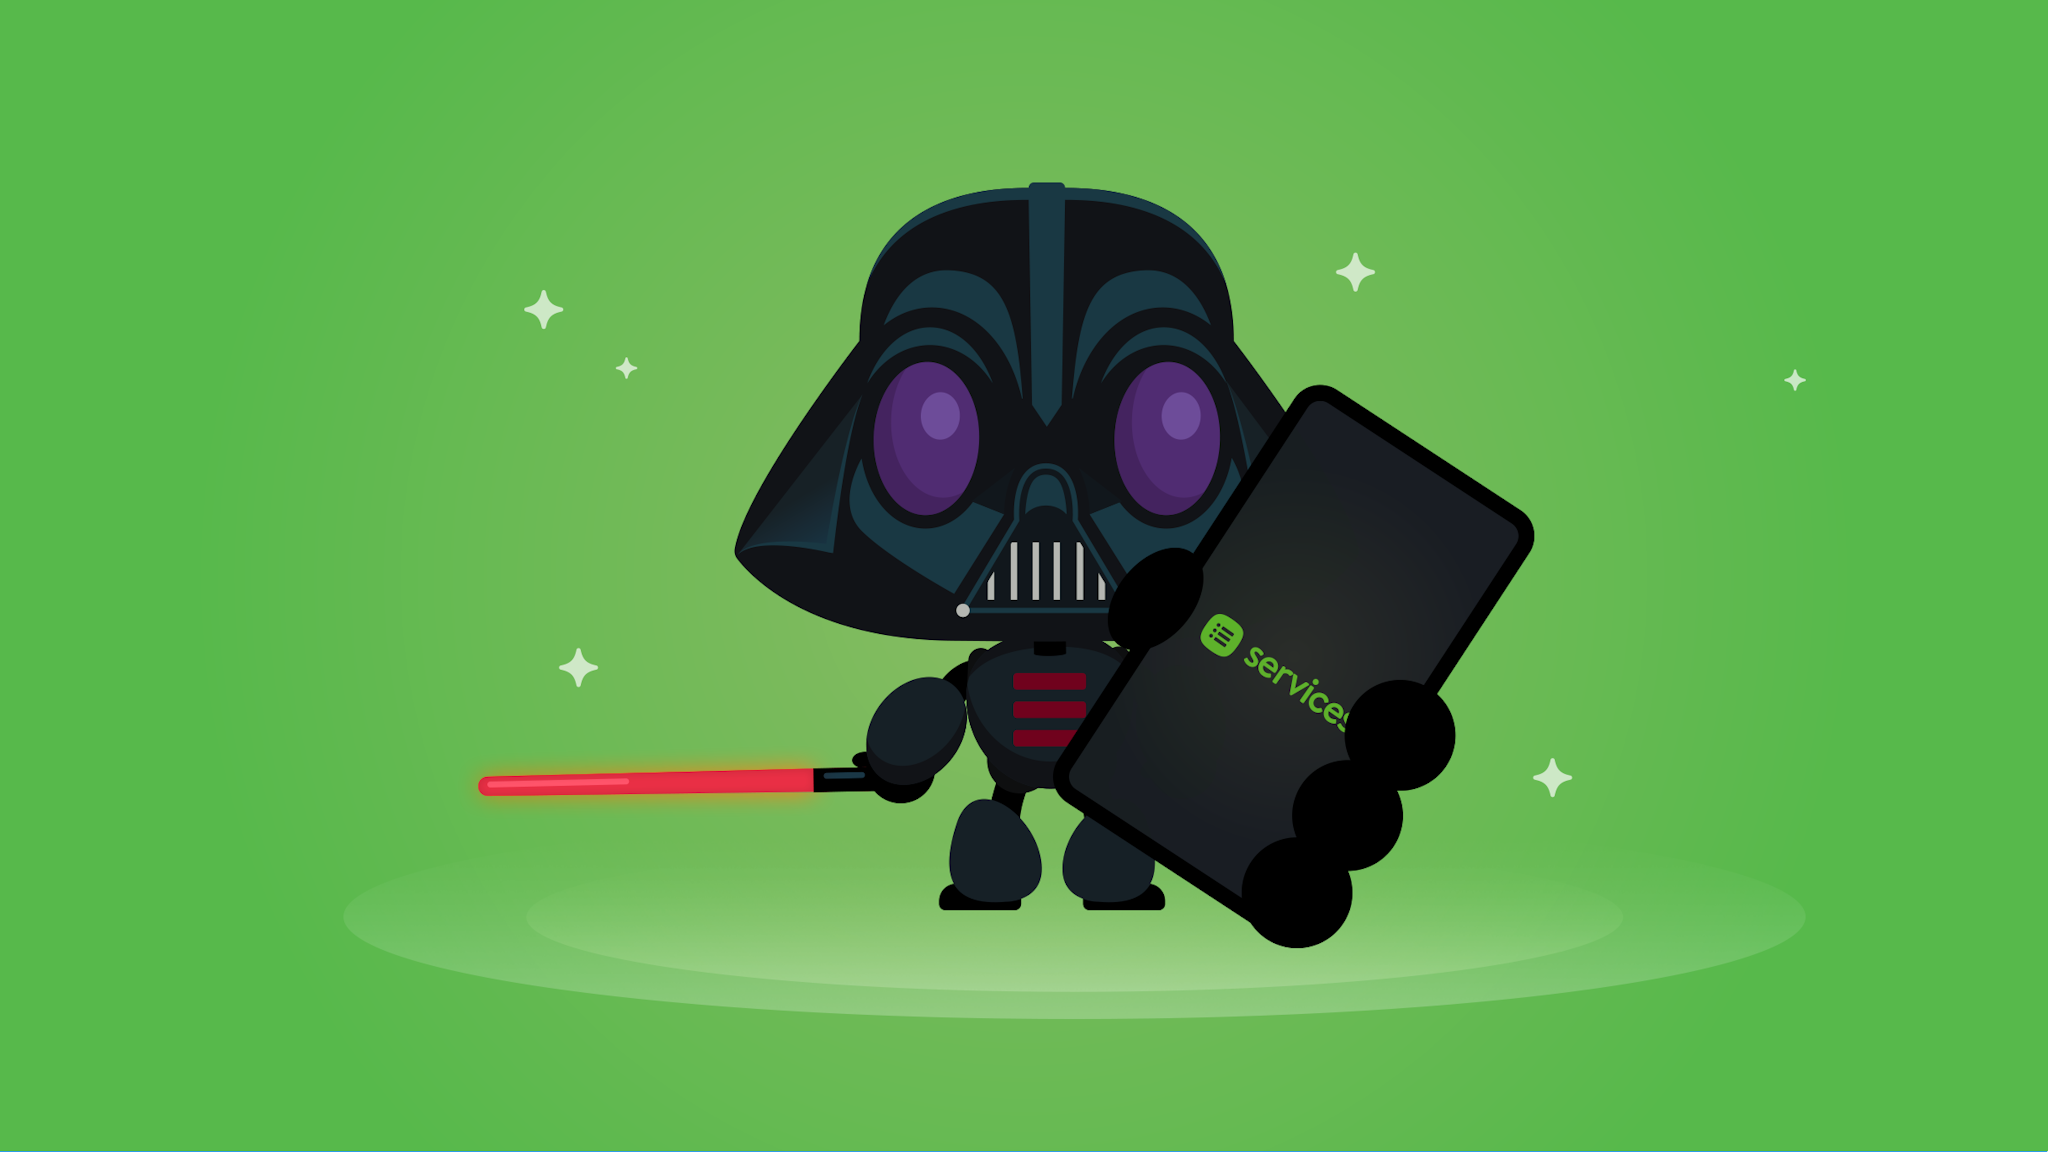 An illustrated Darth Vader Pico holding a phone with the Services logo.